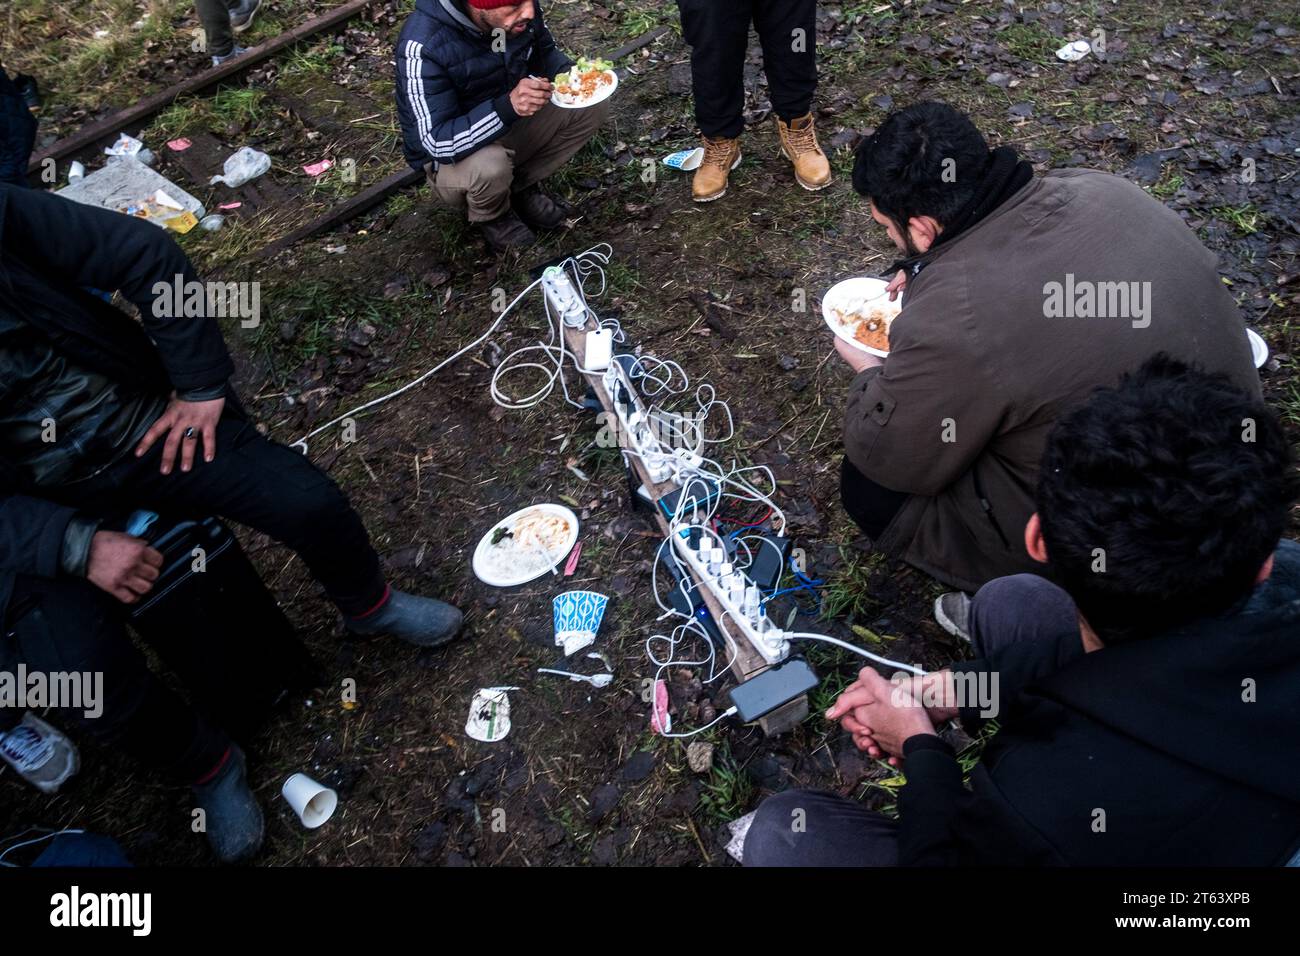 Michael Bunel/Le Pictorium - November 2016, Evacuation of the Calais 'Jungle - 29/11/2021 - France/Haut de France/? Loon Plage ? - Men charging their laptops on power strips connected to a generator brought in by an association. Following the evacuation of the Grande Synthe camp on November 16, a new camp, made up mainly of Kurdish exiles, has been set up near Grande Synthe. November 29, 2021. Loon Plage. France. November 2016, the 'jungle' of Calais, the largest shantytown in Europe, was evacuated. Five years later, the exiles on the road to Great Britain are still there and c Stock Photo